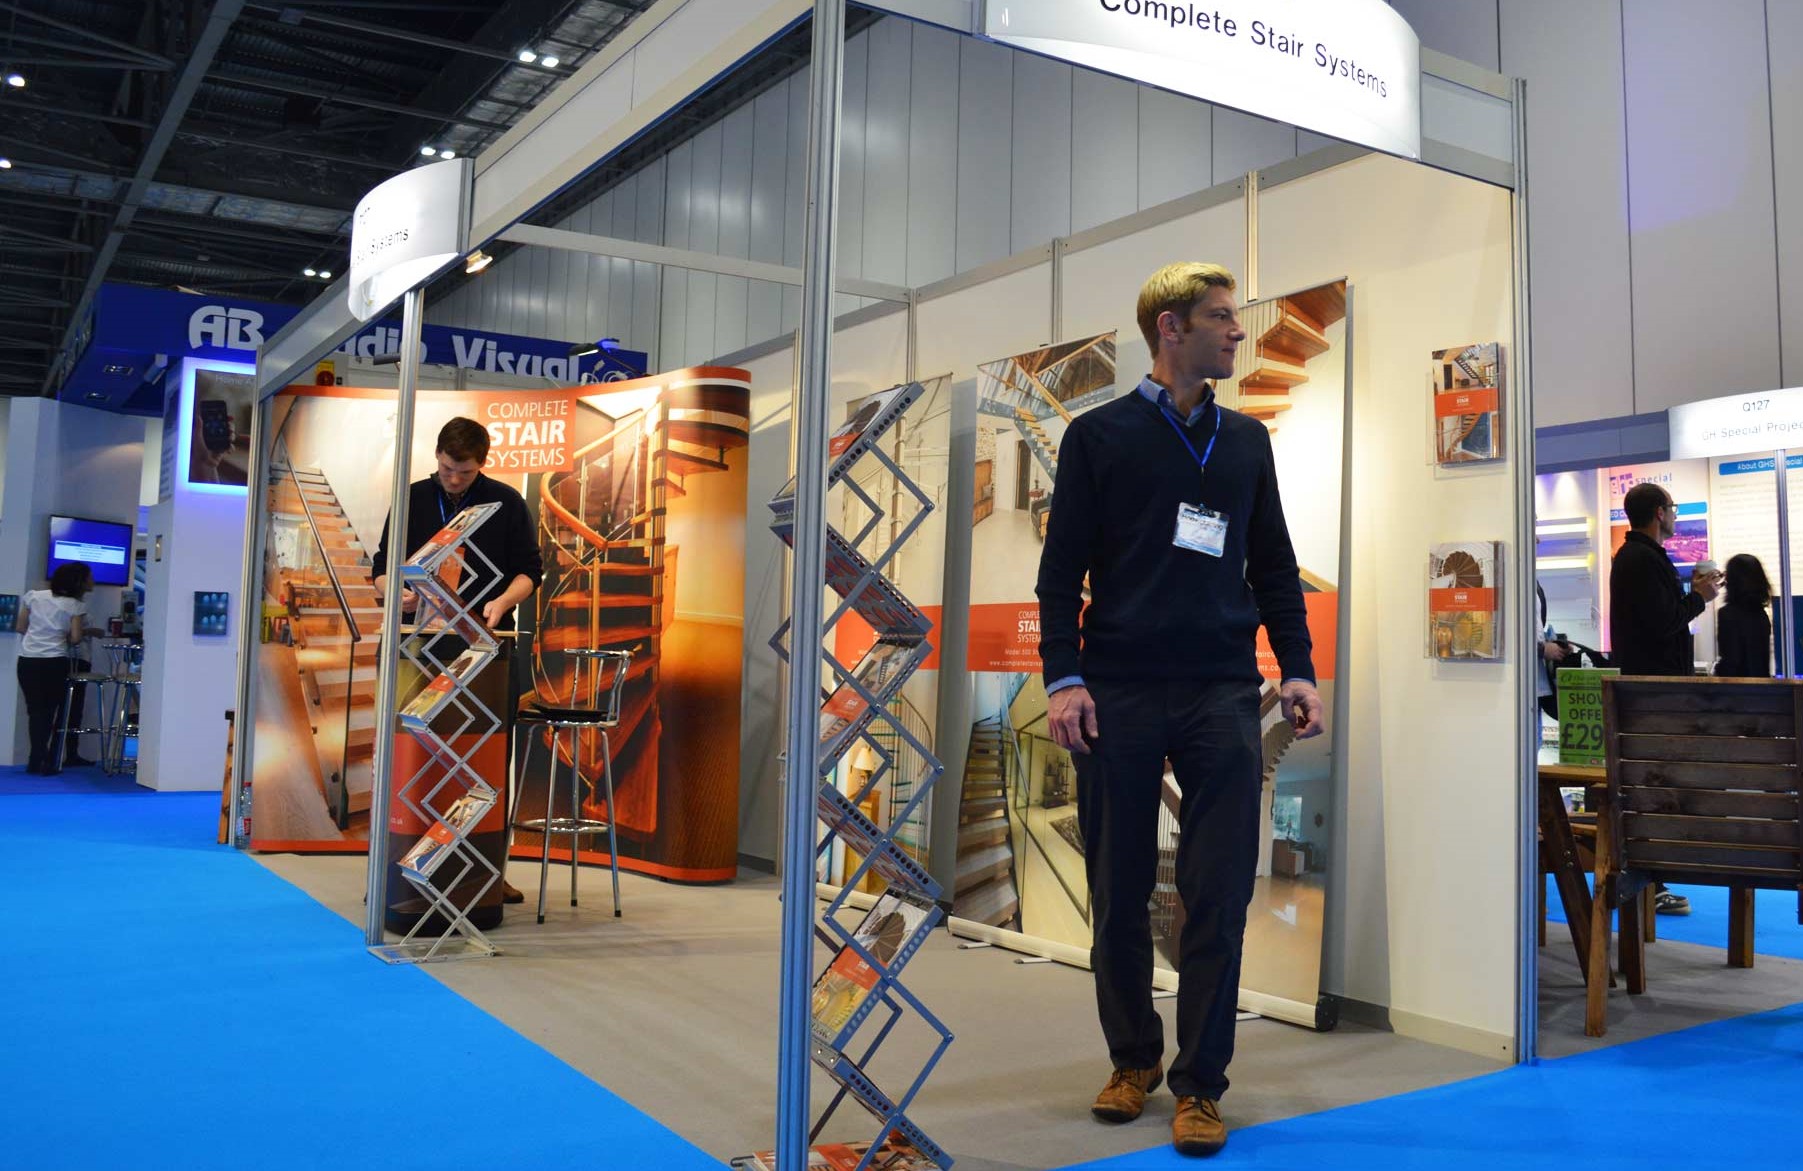 The Complete Stair Systems stand at an older exhibition